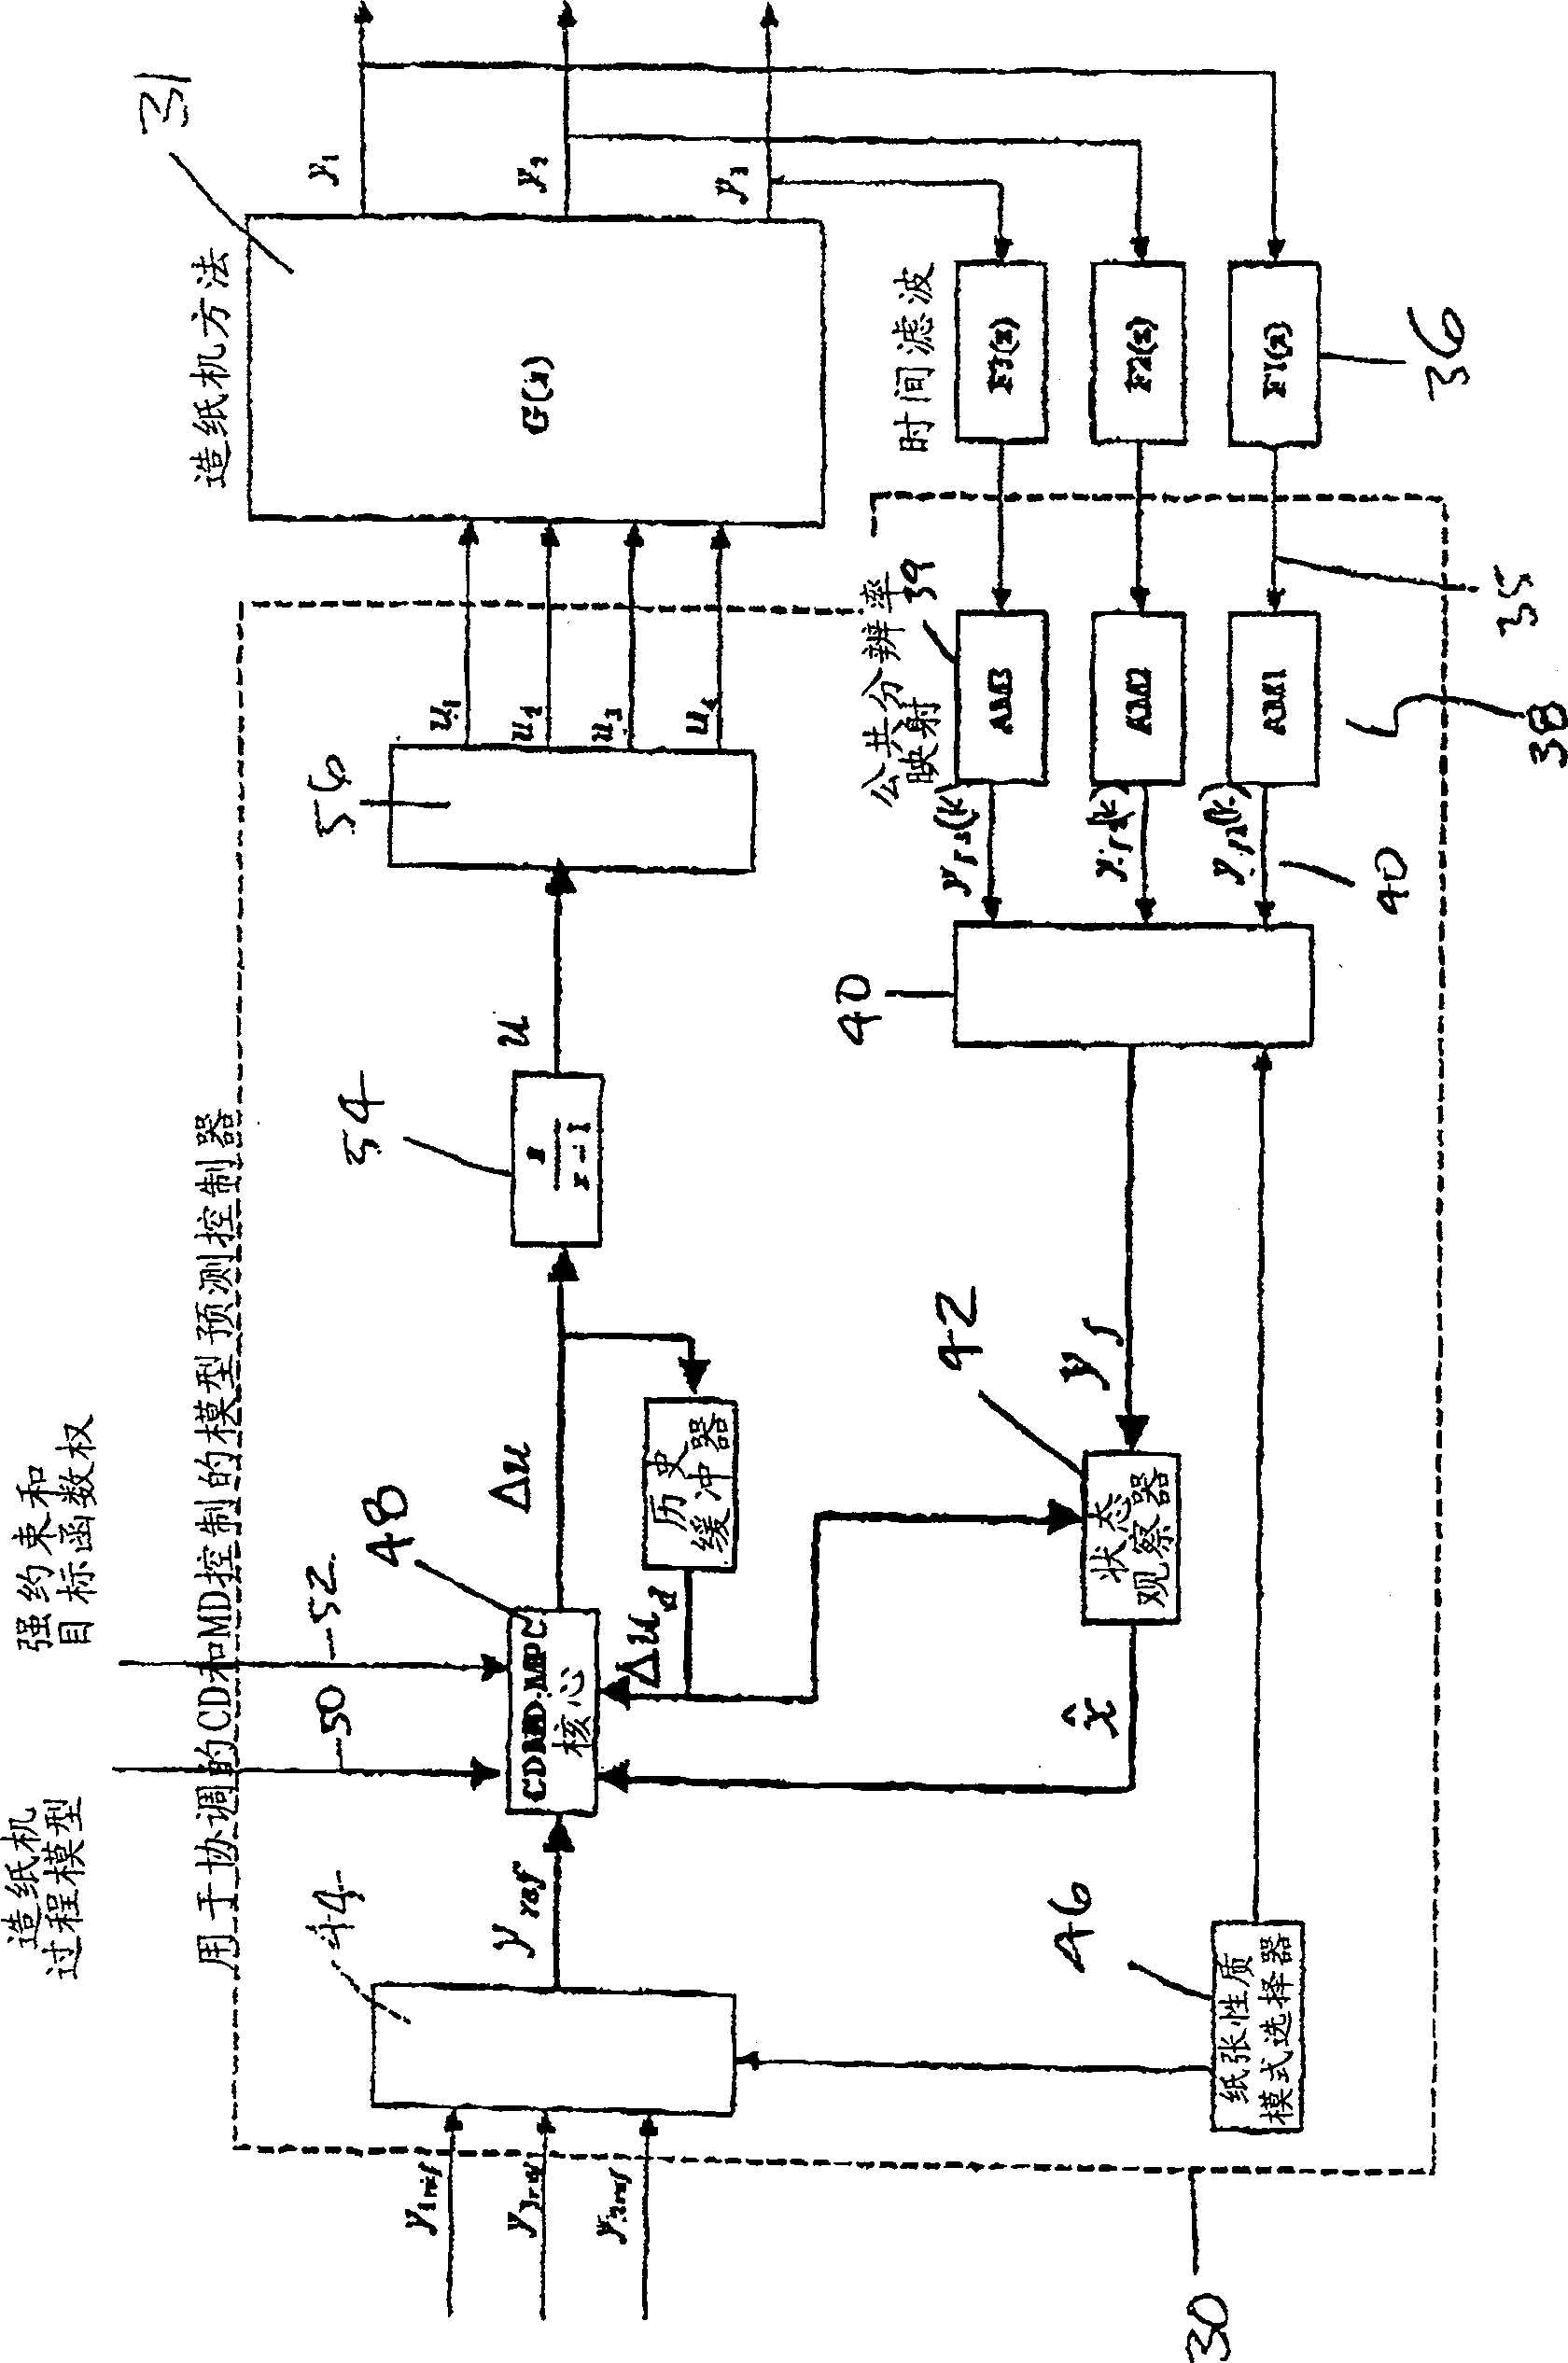 Model predictive controller for coordinated cross direction and machine direction control